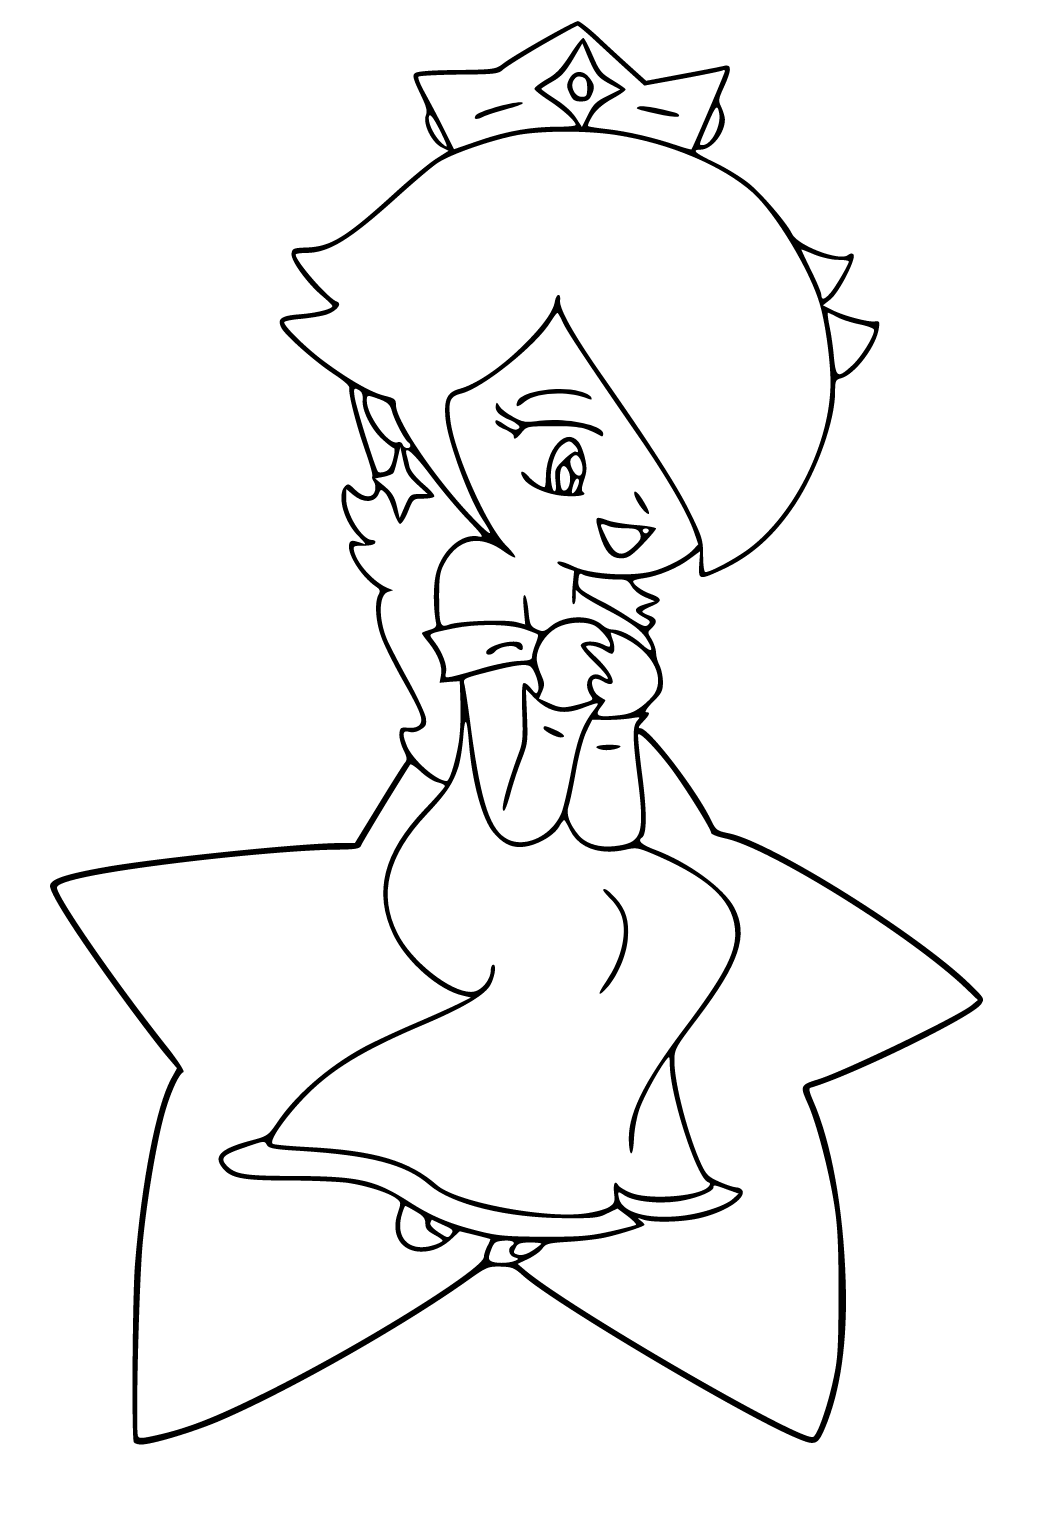 Free printable rosalina queen coloring page for adults and kids